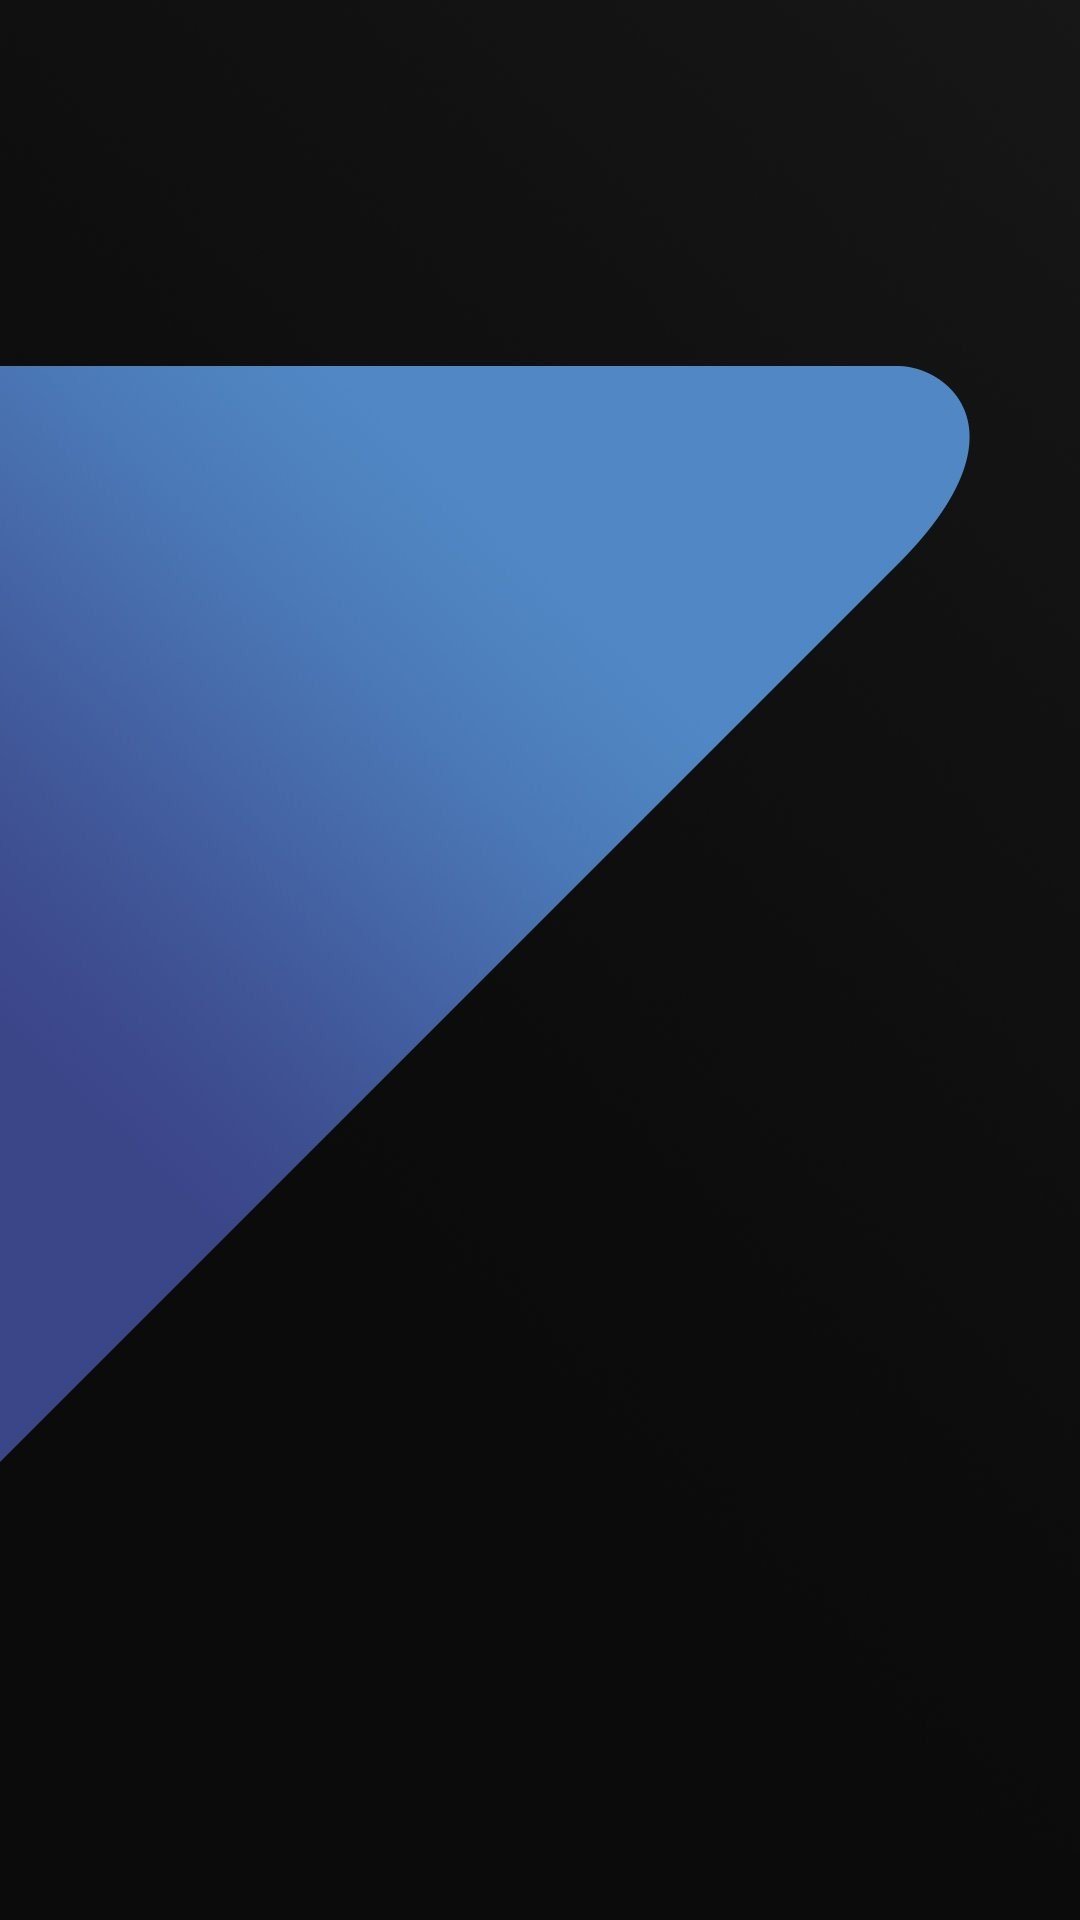 Samsung Galaxy S7 wallpapers  get the S7Edge default wallpapers here